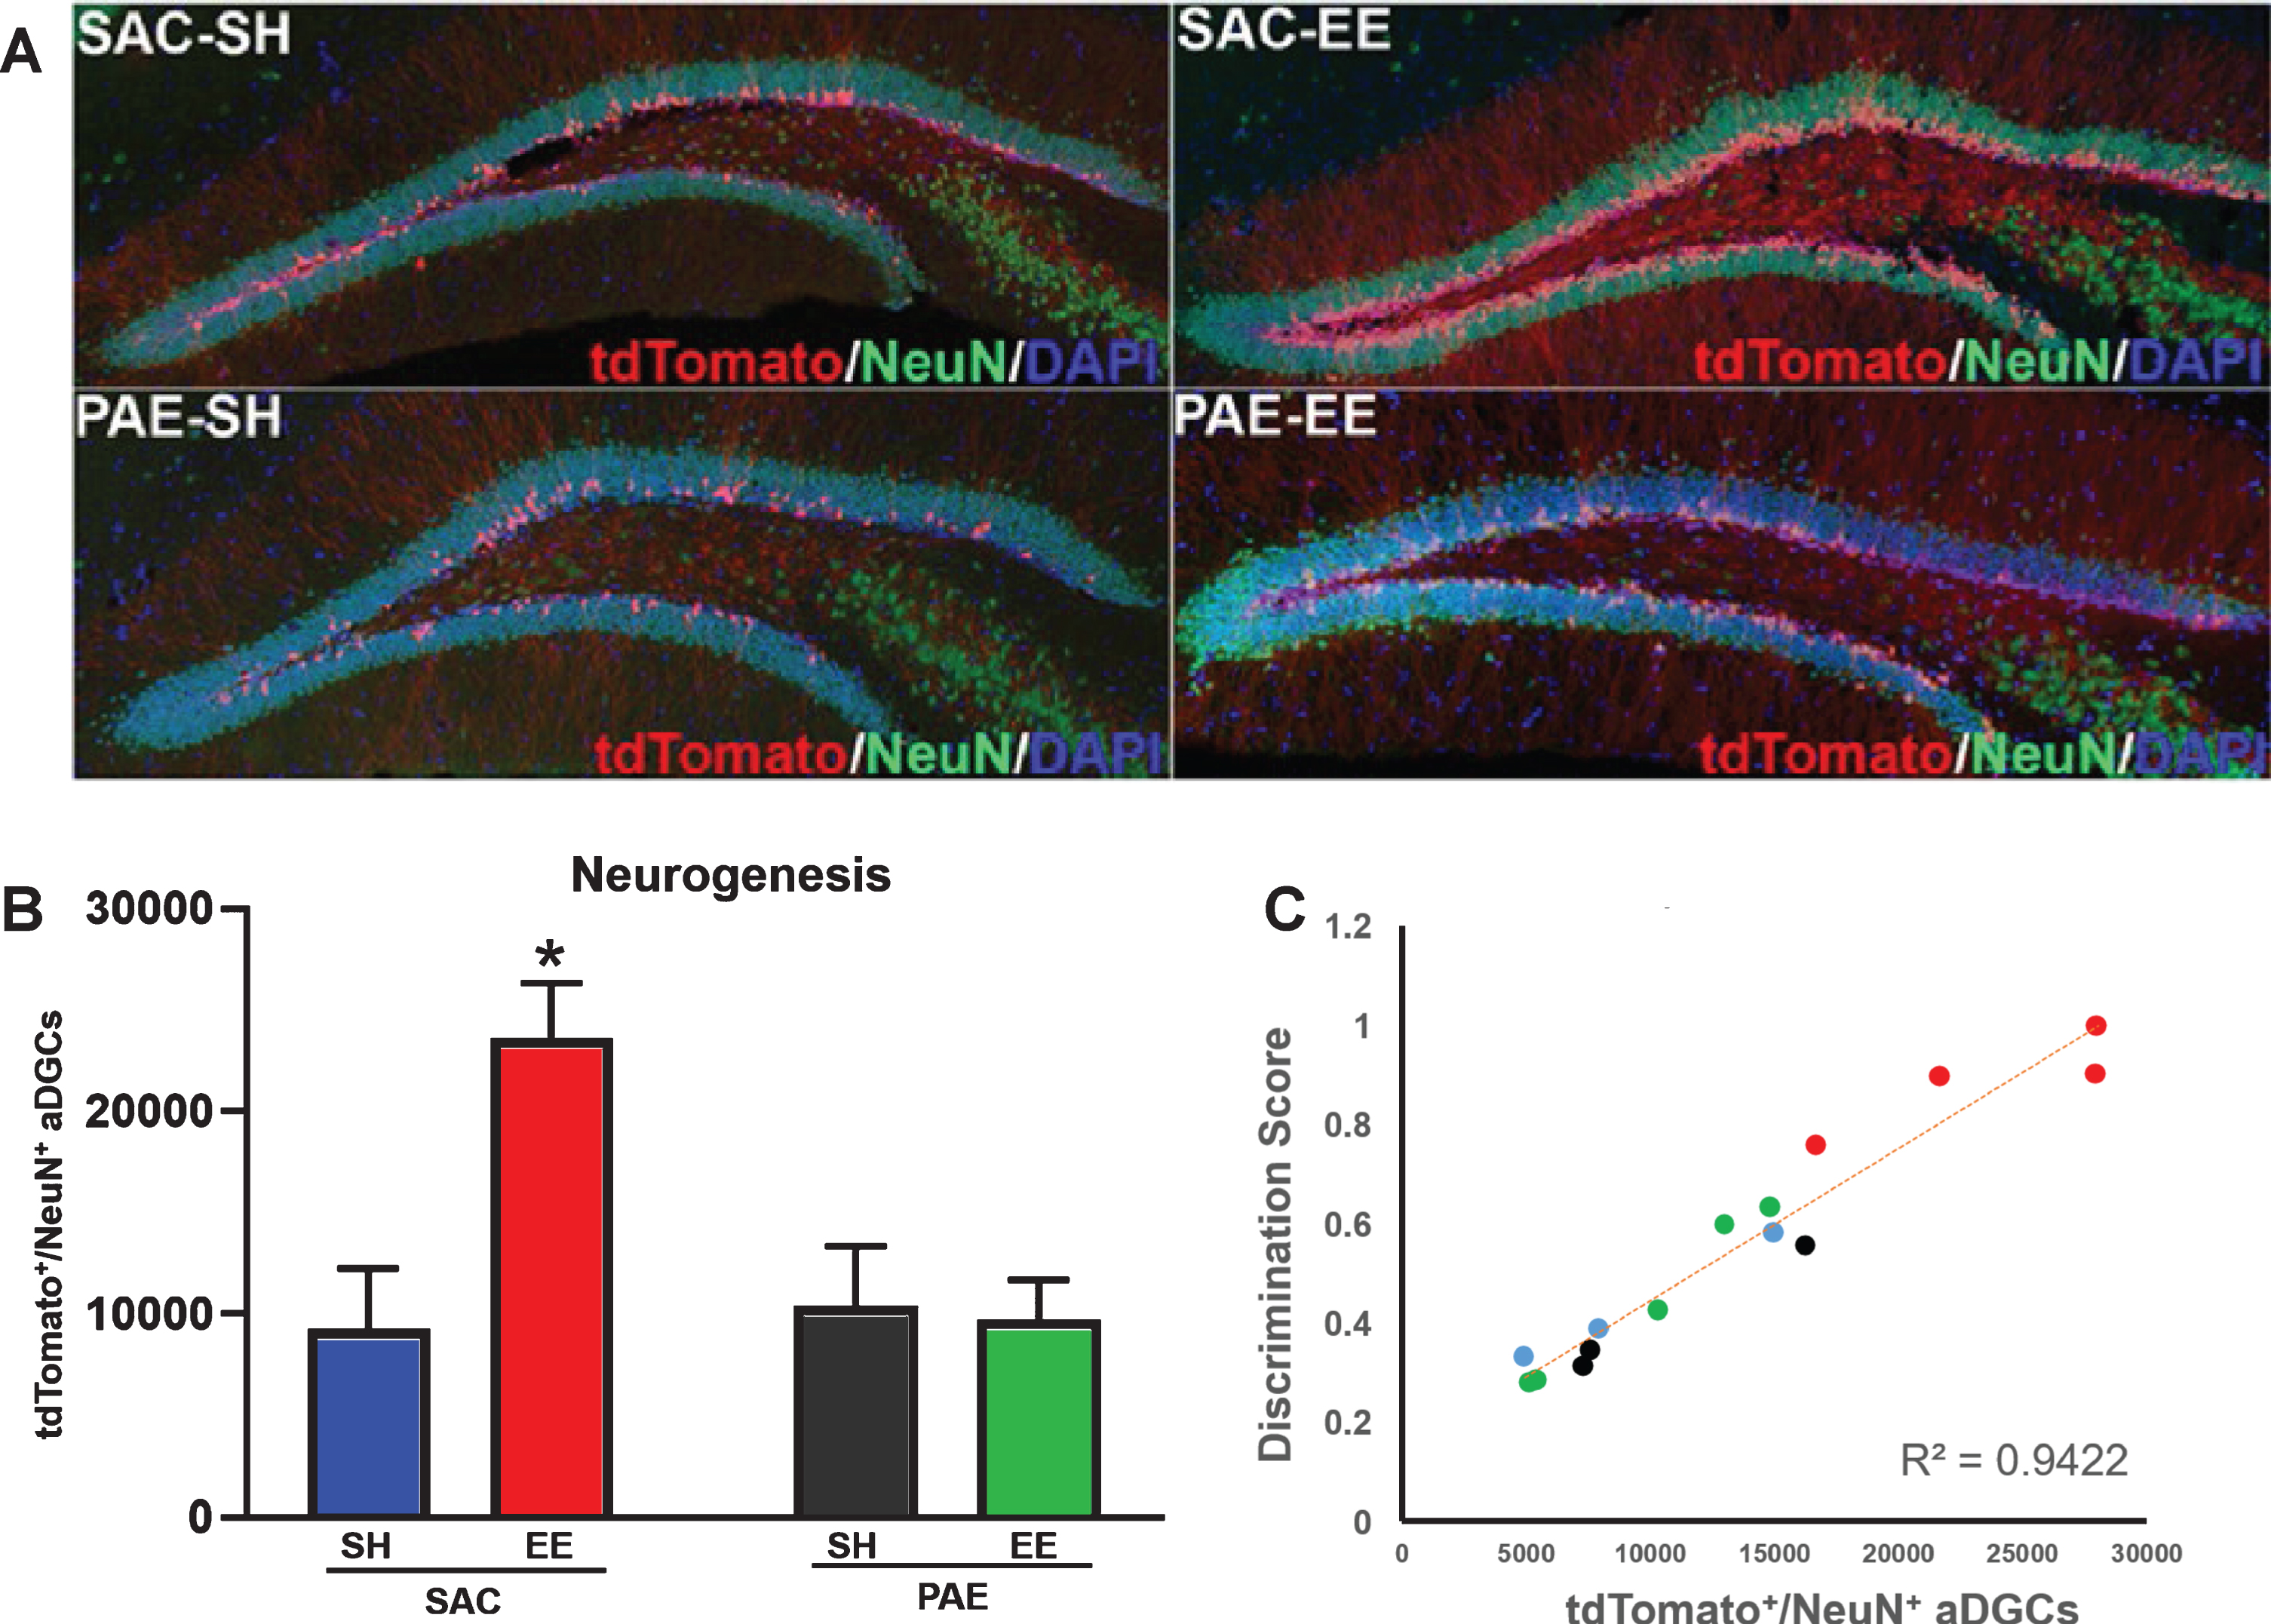 Impaired EE-mediated discrimination learning in PAE mice is directly correlated with impaired neurogenesis. A. Representative confocal microscopy images of coronal sections through the dorsal dentate gyrus demonstrating tdTomato+ aDGCs (red), NeuN+ mature postmitotic neurons (green), DAPI+ nuclear counterstain (blue). B. Number of tdTomato+/NeuN+aDGCs across groups (means±SEM). Two-way ANOVA statistics: alcohol treatment [F (1,11) = 5.83, p = 0.03)], housing [F(1,11) = 6.74, p = 0.02], alcohol treatment x housing interaction [F(1,11) = 8.07, p = 0.01]. *p = 0.02 SAC-SH vs. SAC-EE; p < 0.01 SAC-EE vs. PAE-EE (Tukey’s post-hoc analysis). N = 4 mice/group. C. Behavioral performance as a function of neurogenesis. Colored circles correspond to data from individual mice from SAC-SH (blue), SAC-EE (red), PAE-SH (black) and PAE-EE (green); i.e., color convention as in B. Pearson correlation, R2 = 0.9422.